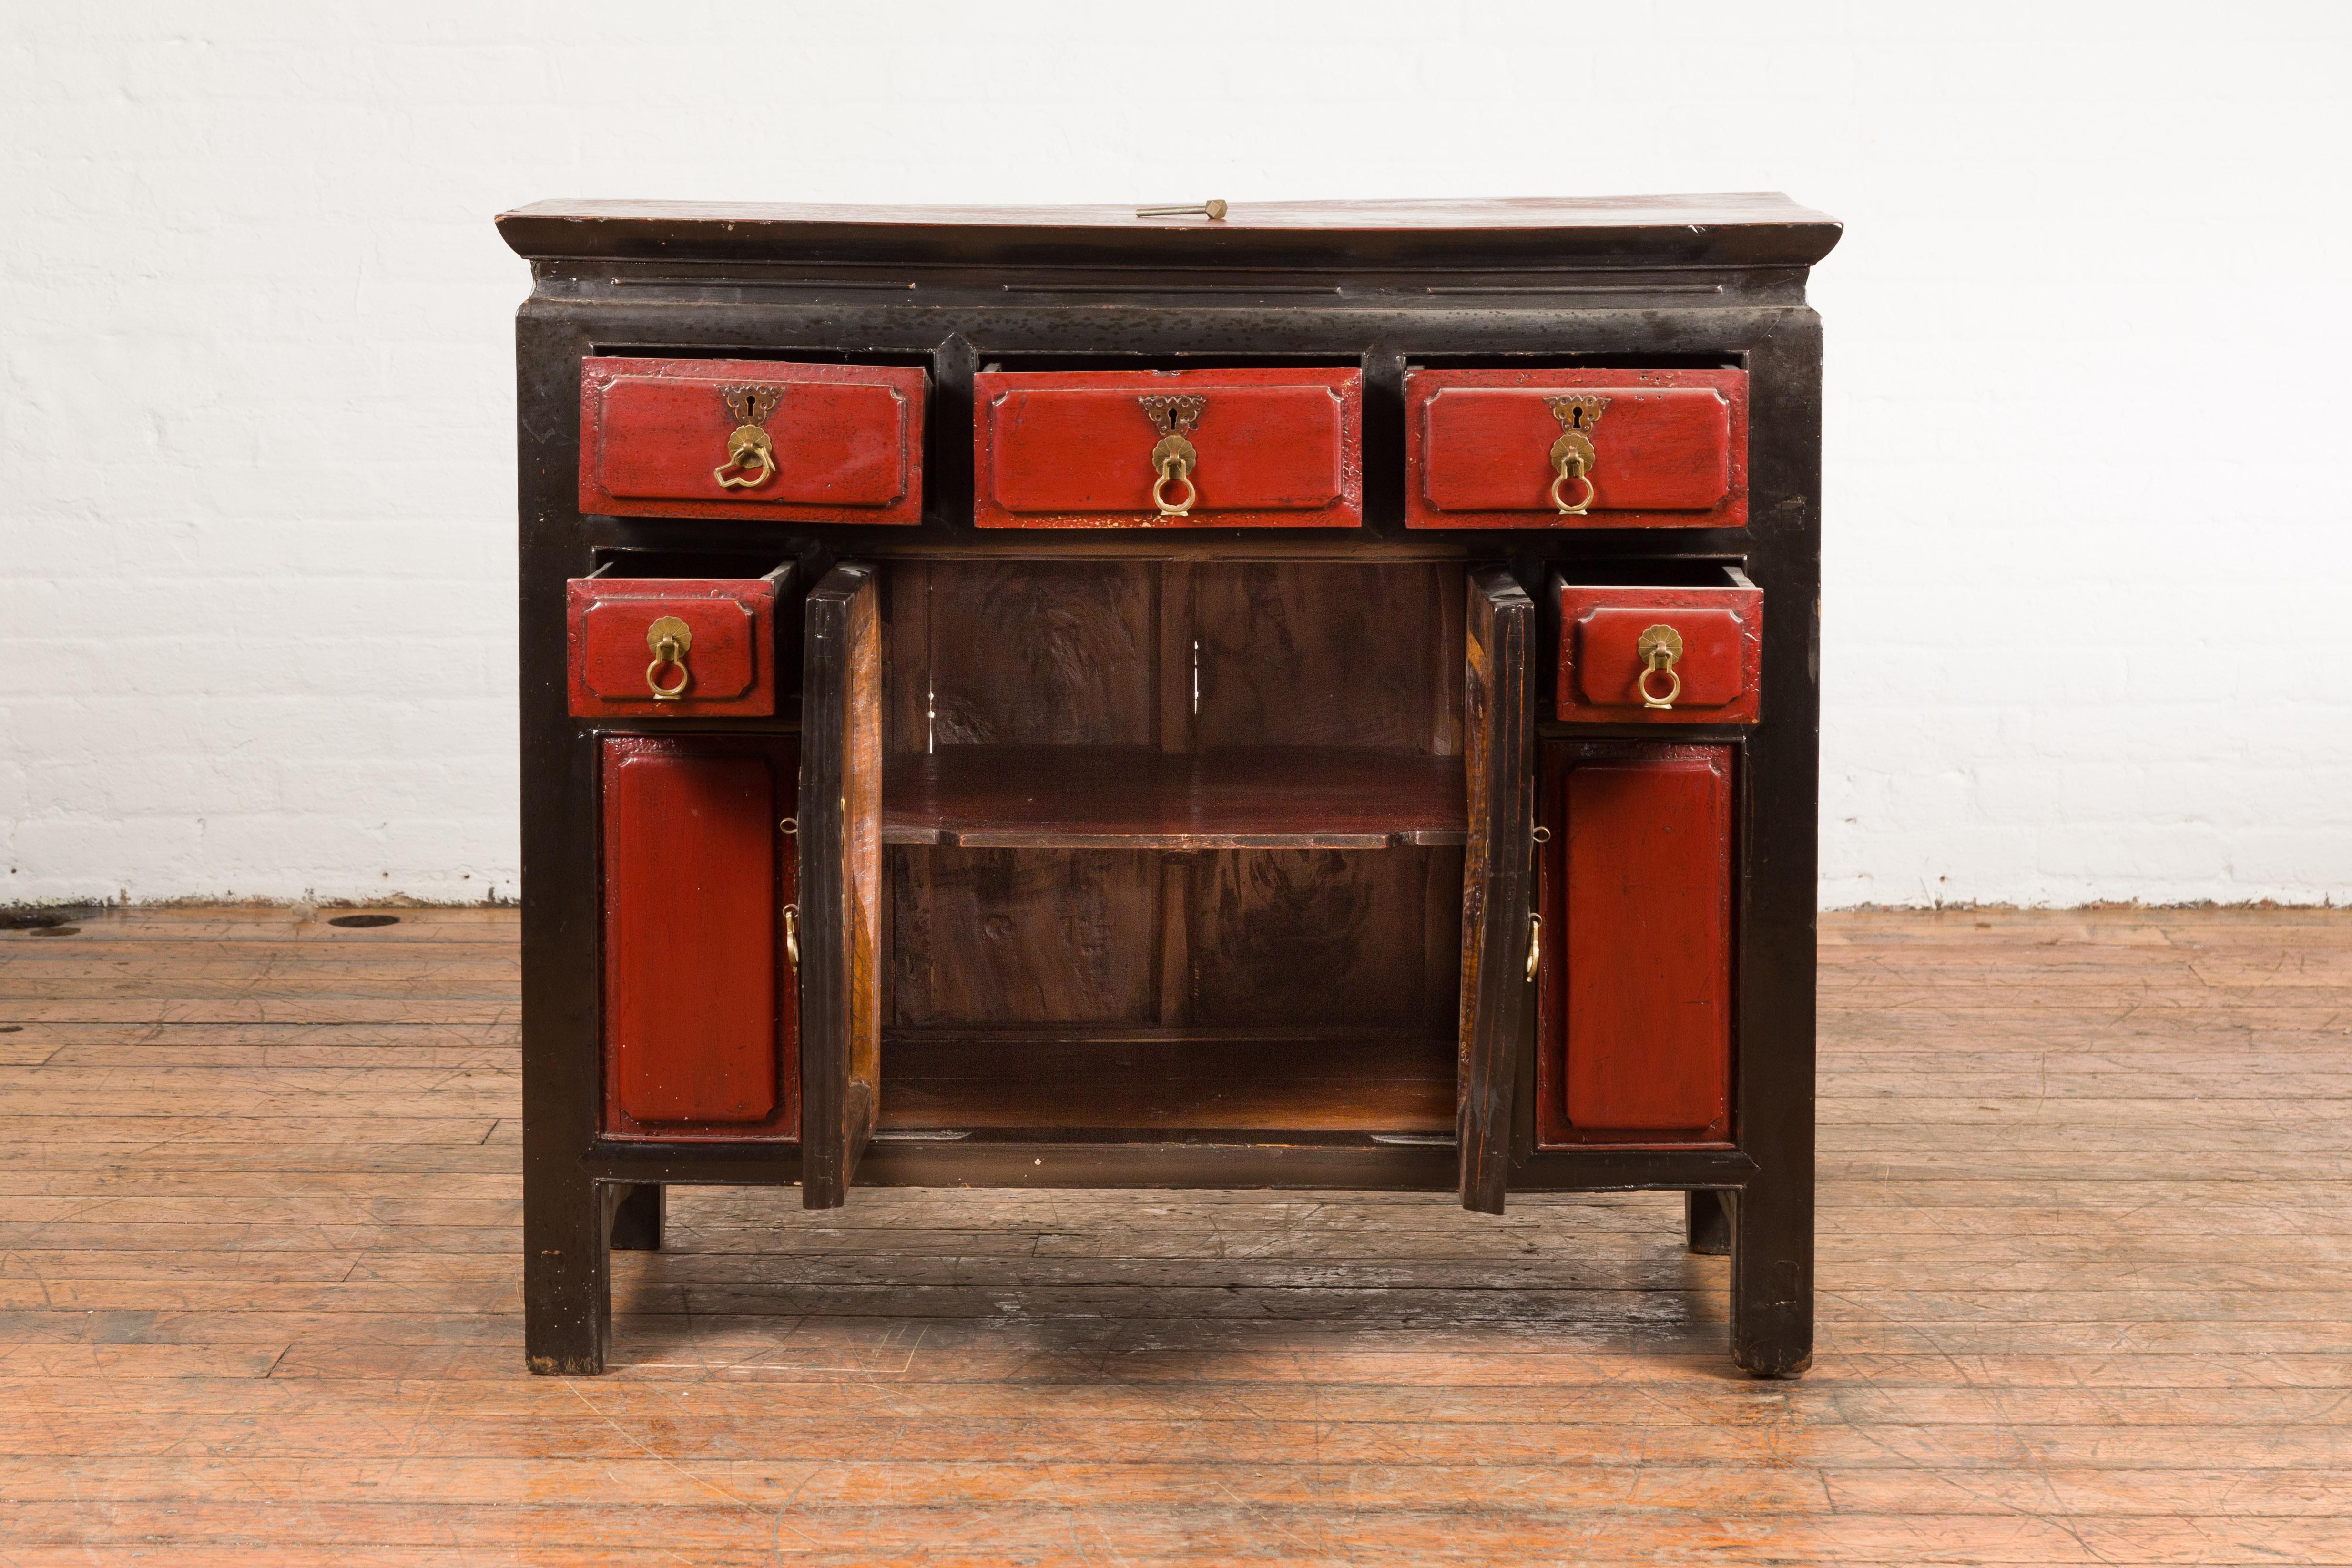 Chinese Qing Dynasty 19th Century Red and Black Lacquer Cabinet with Drawers For Sale 6